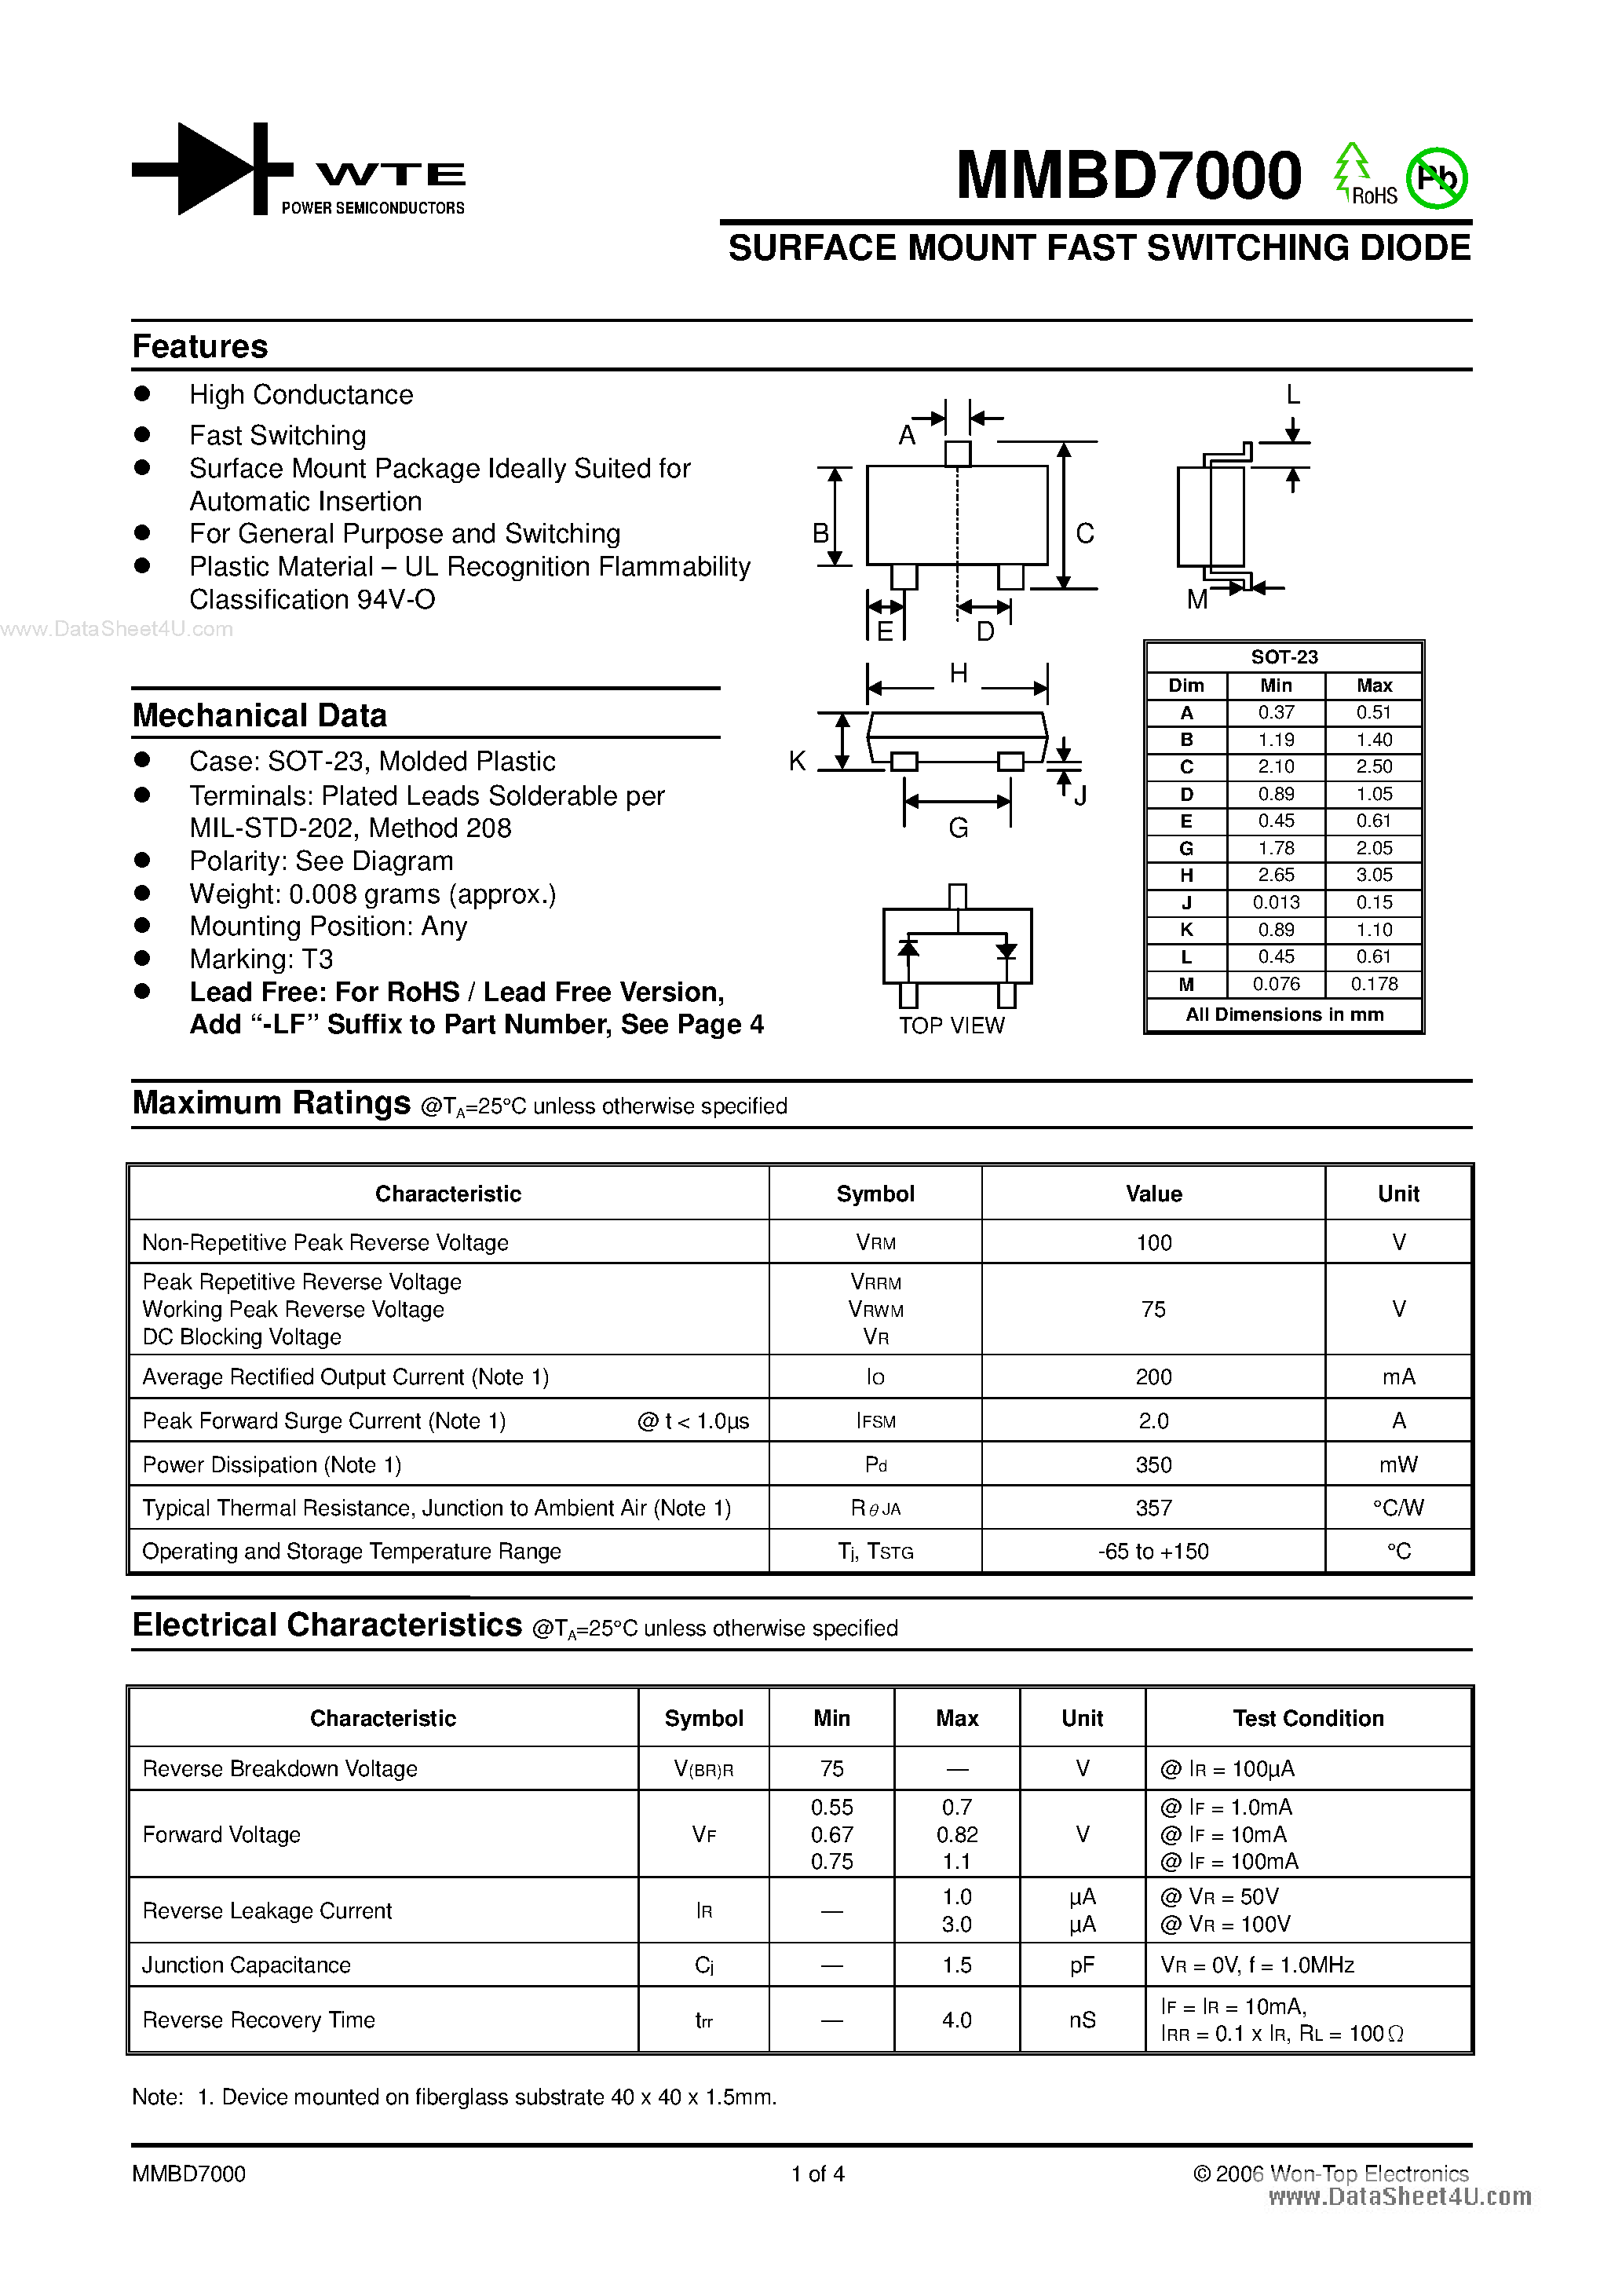 Даташит MMBD7000 - SURFACE MOUNT FAST SWITCHING DIODE страница 1